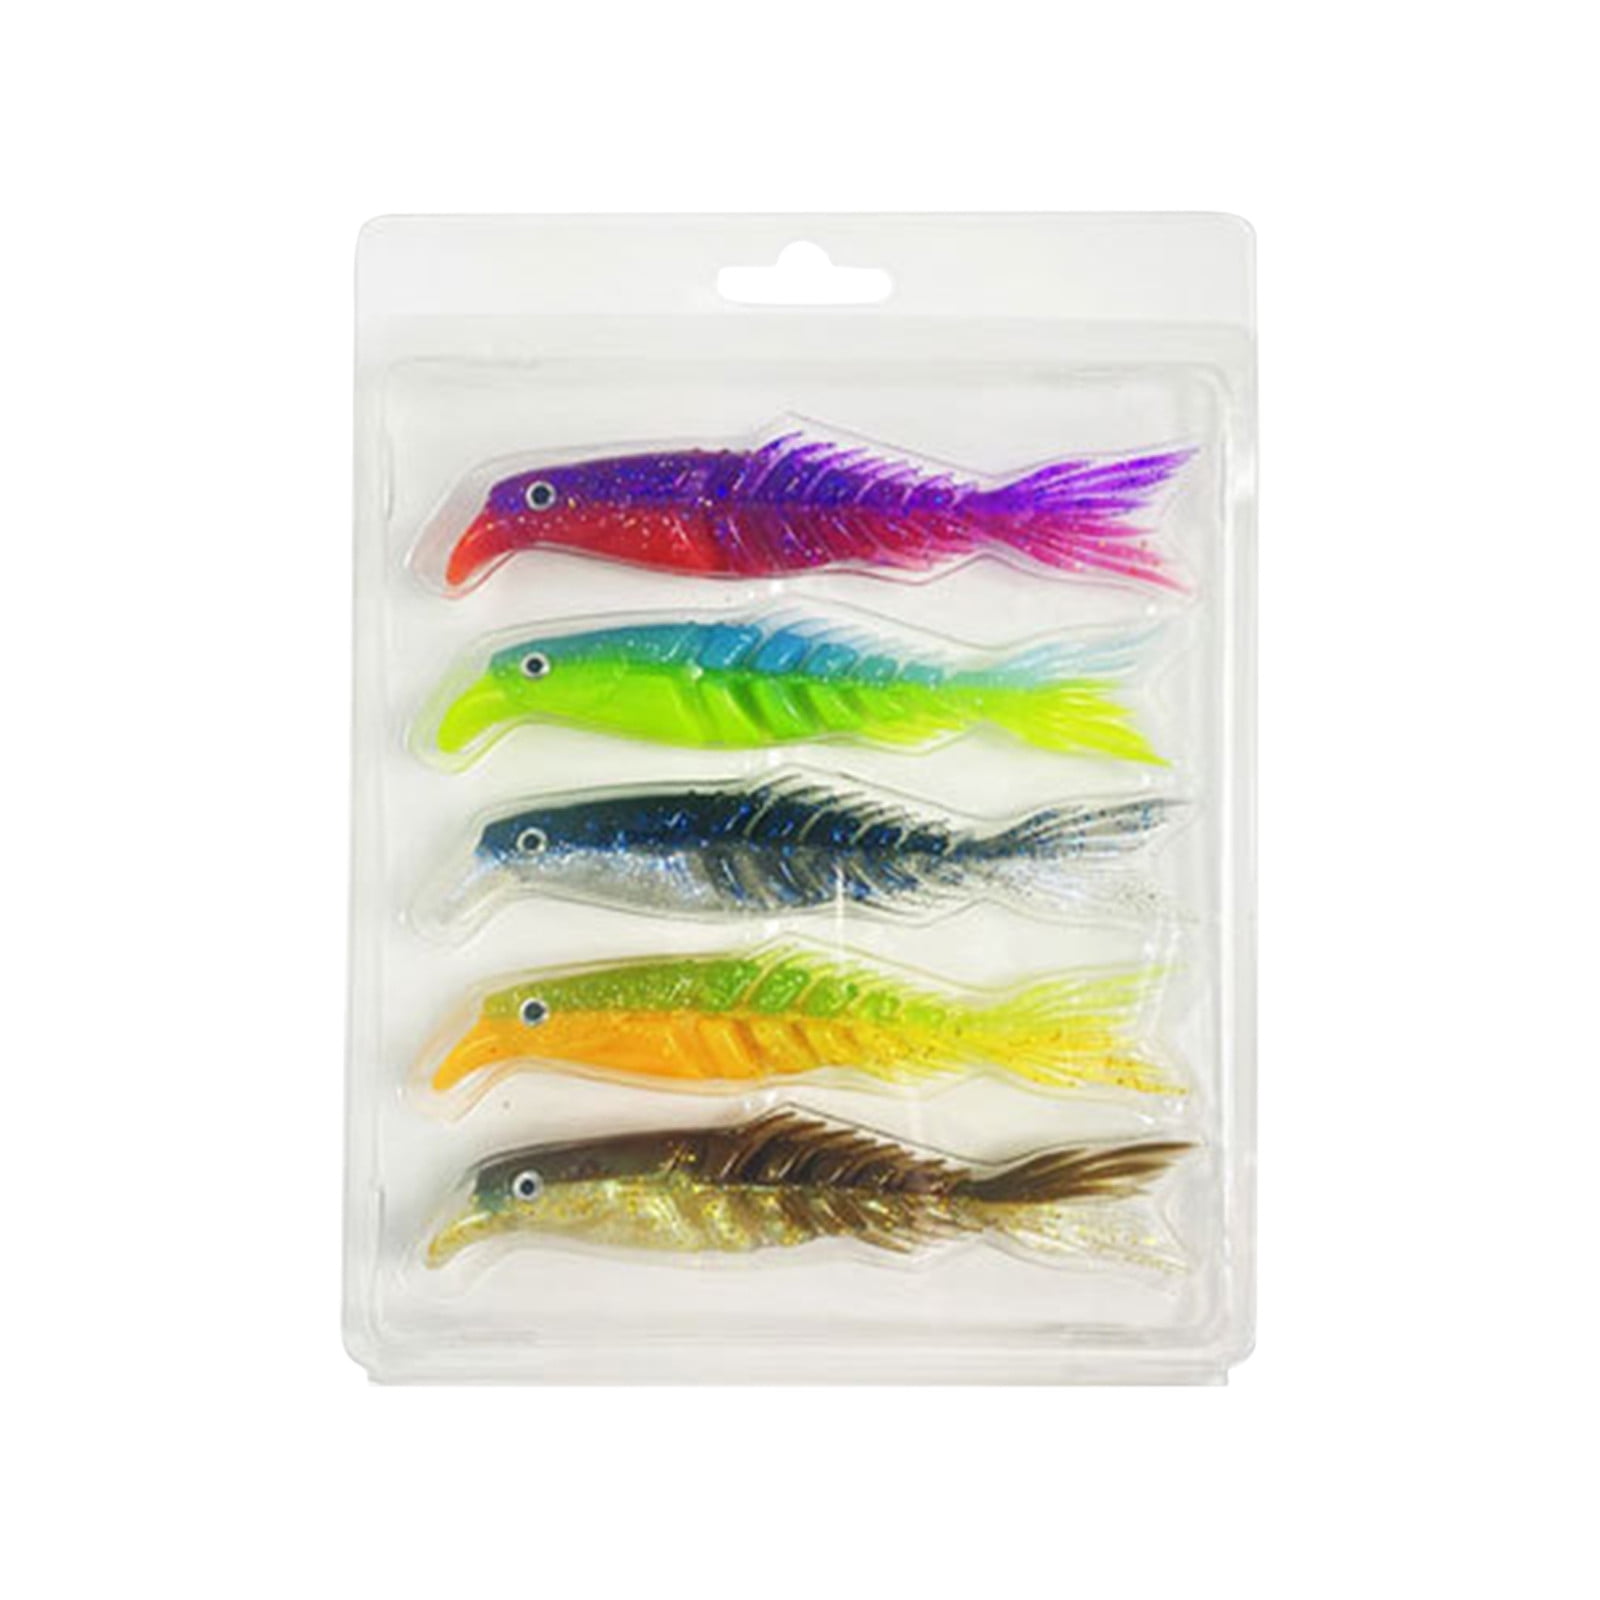 Paddle Tail Swimbaits, Soft Plastic Fishing Lures for Bass Fishing